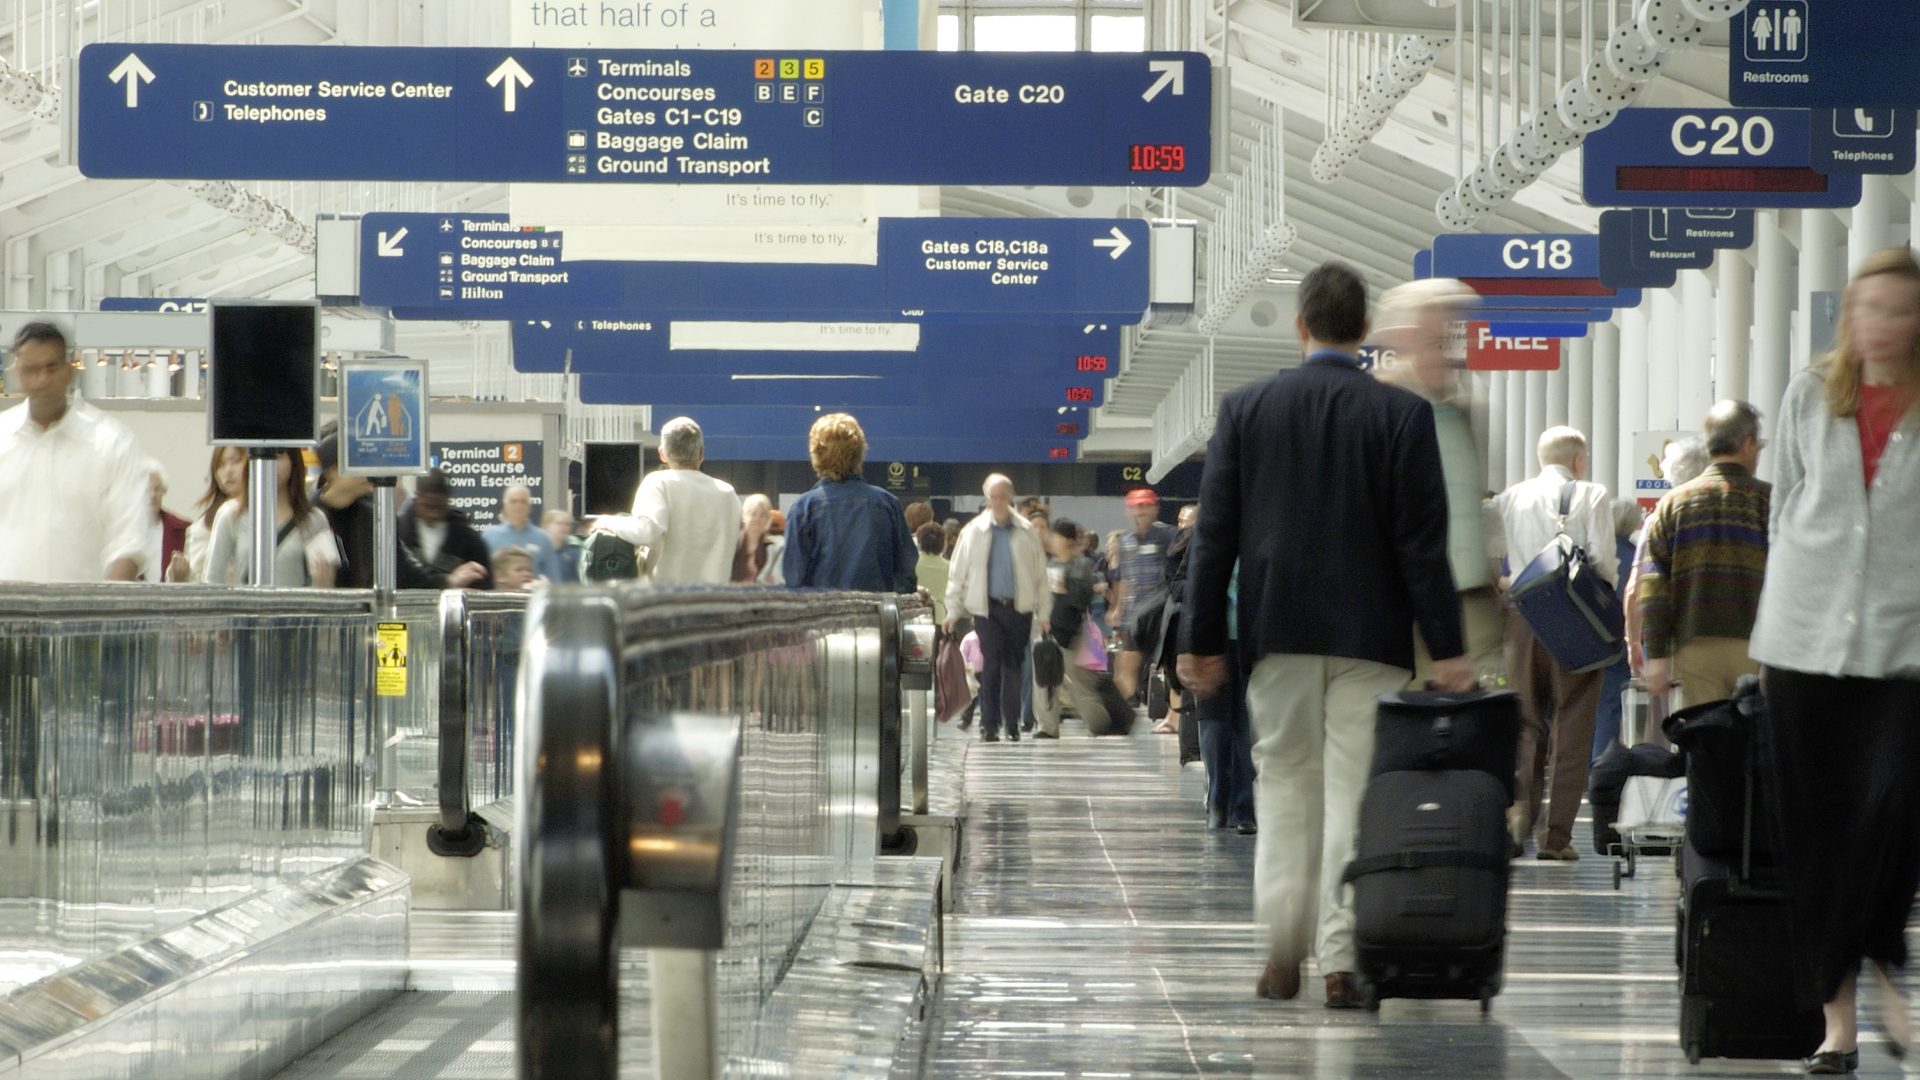 How to Navigate the Airport - NerdWallet